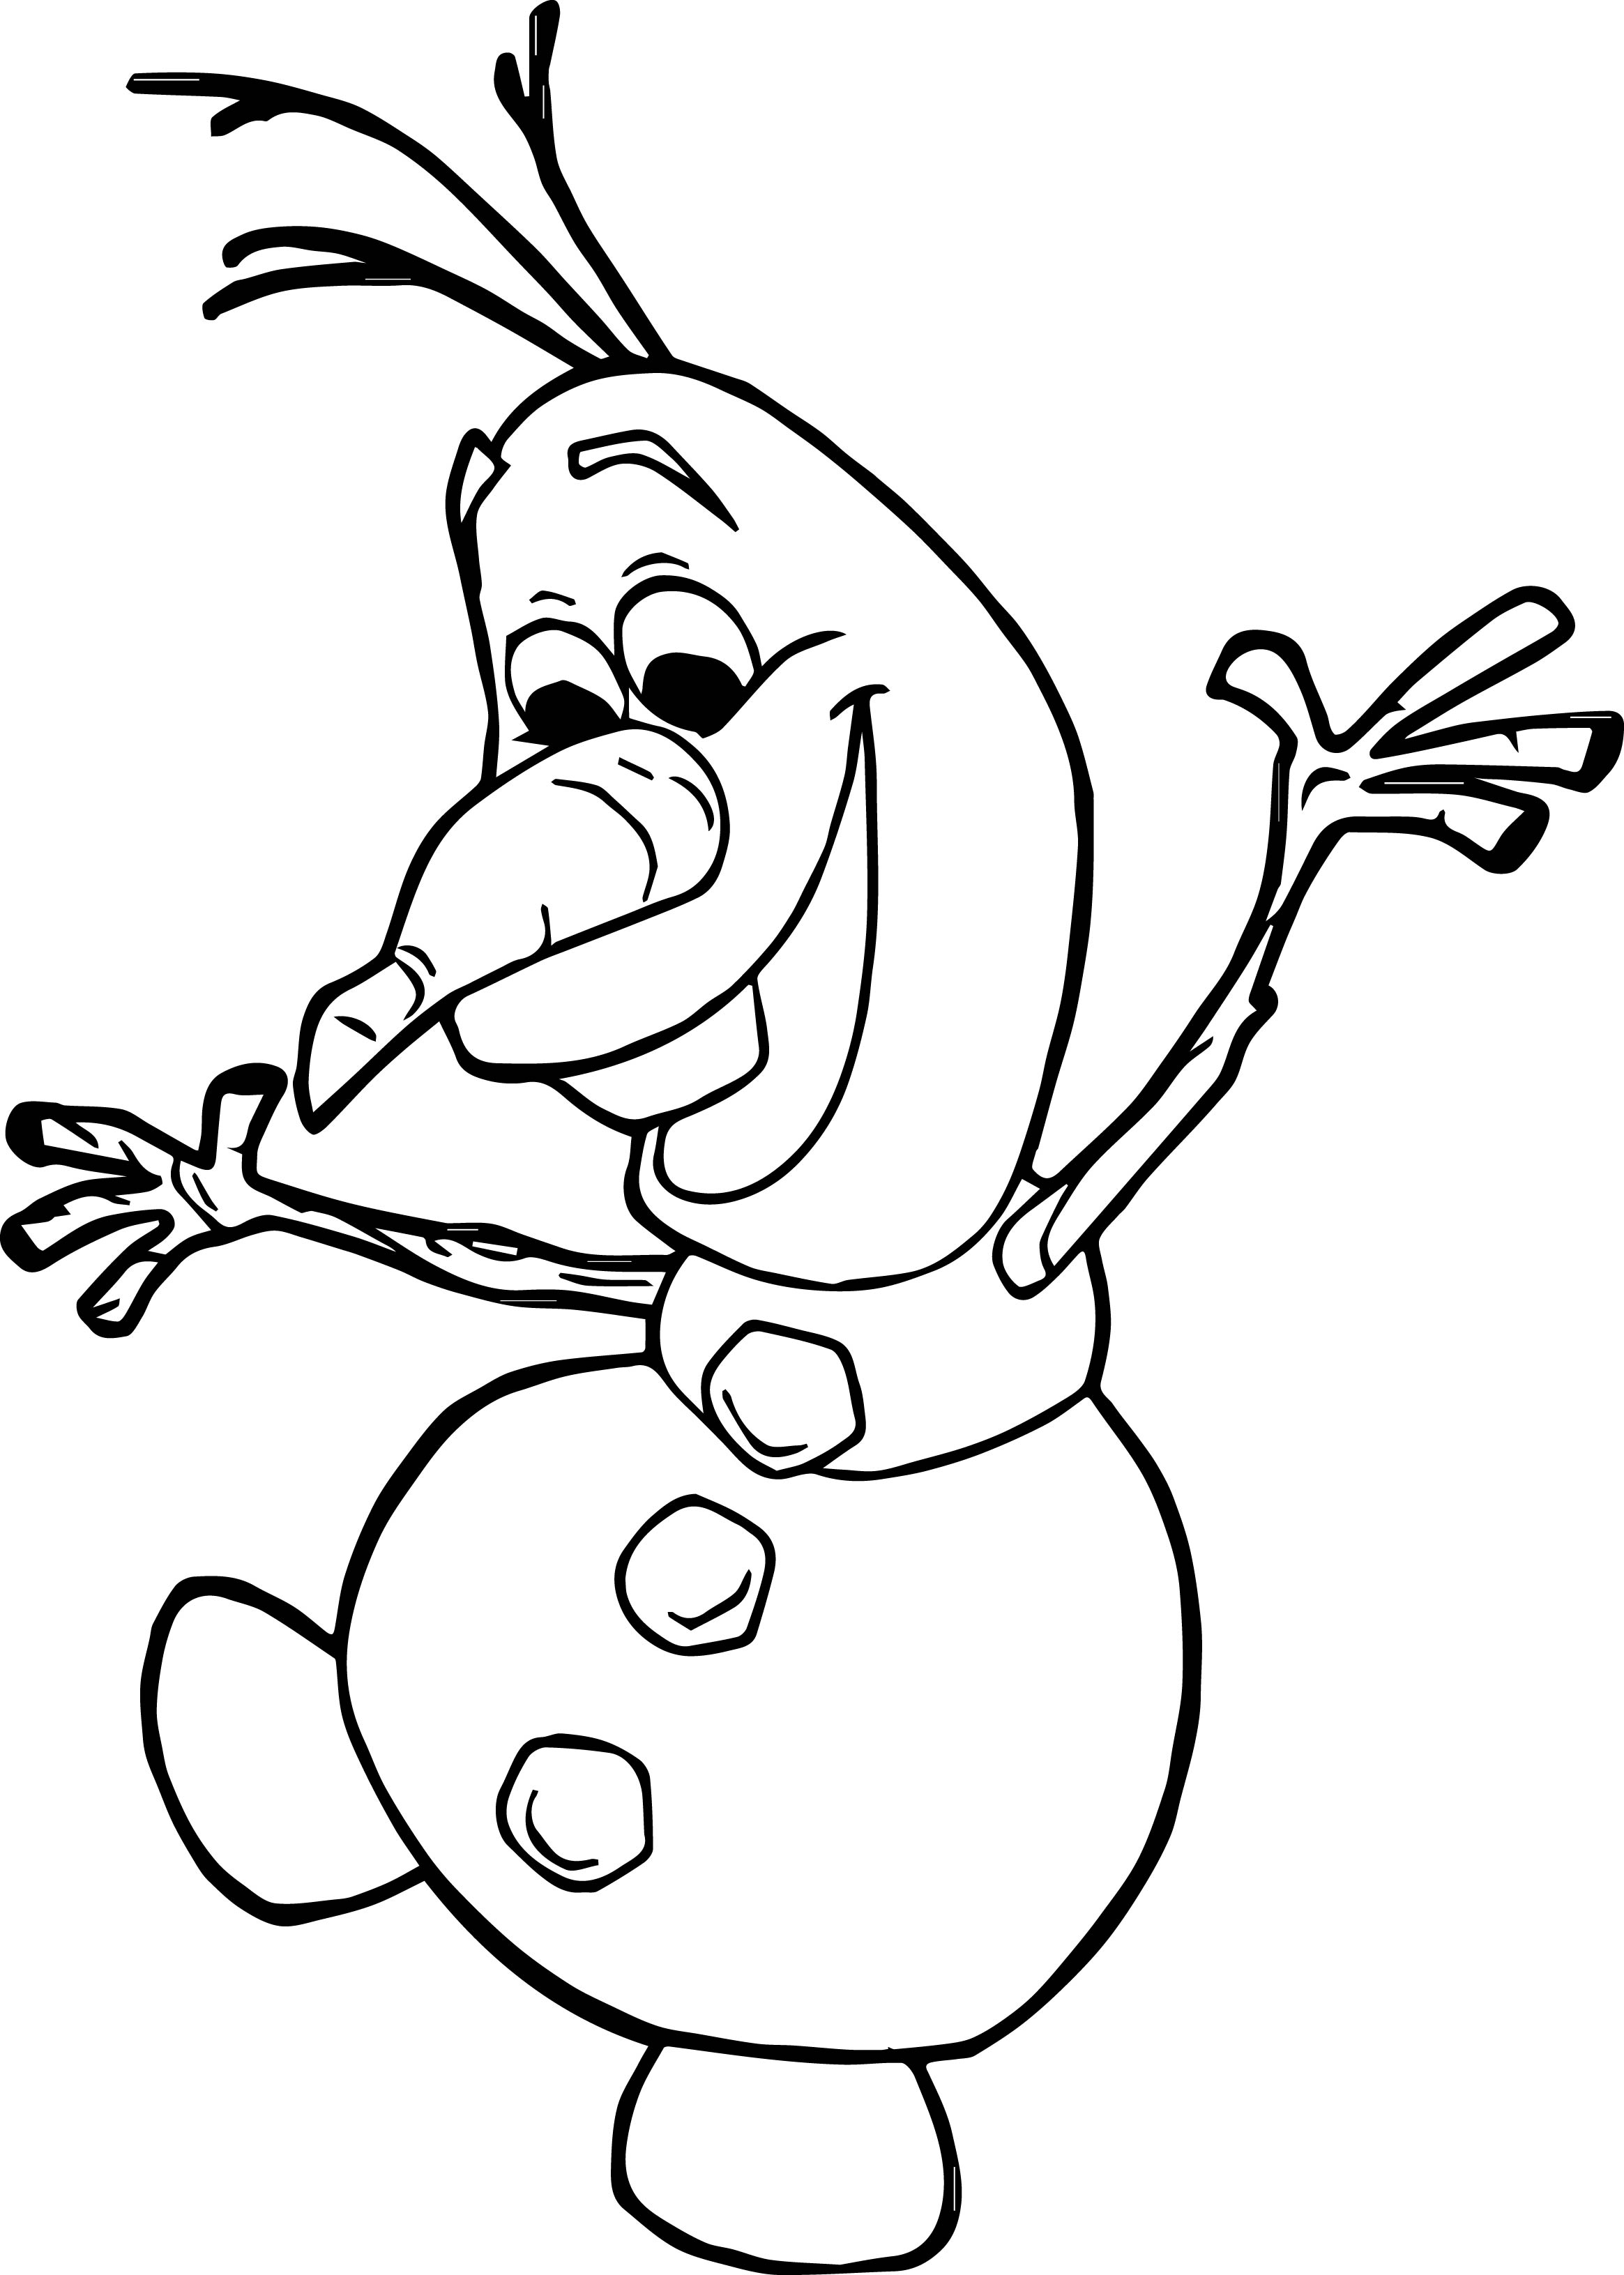 the-best-free-olaf-coloring-page-images-download-from-580-free